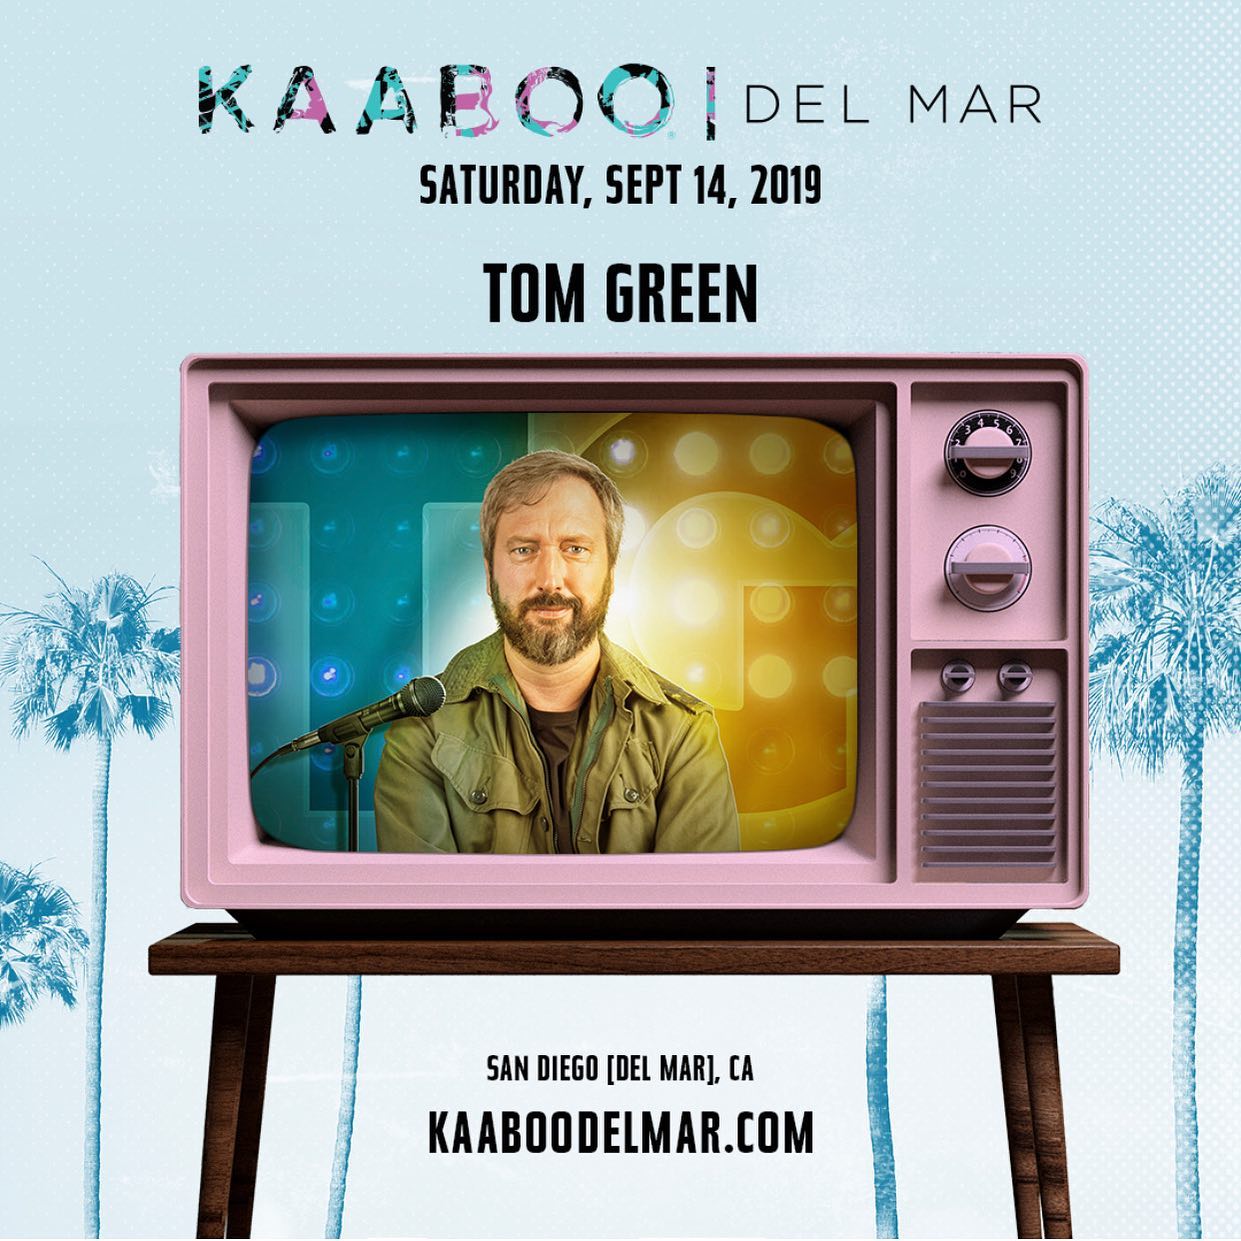 Get tickets now for my standup comedy show @kaaboodelmar this is gonna be a hilarioussss good time!!